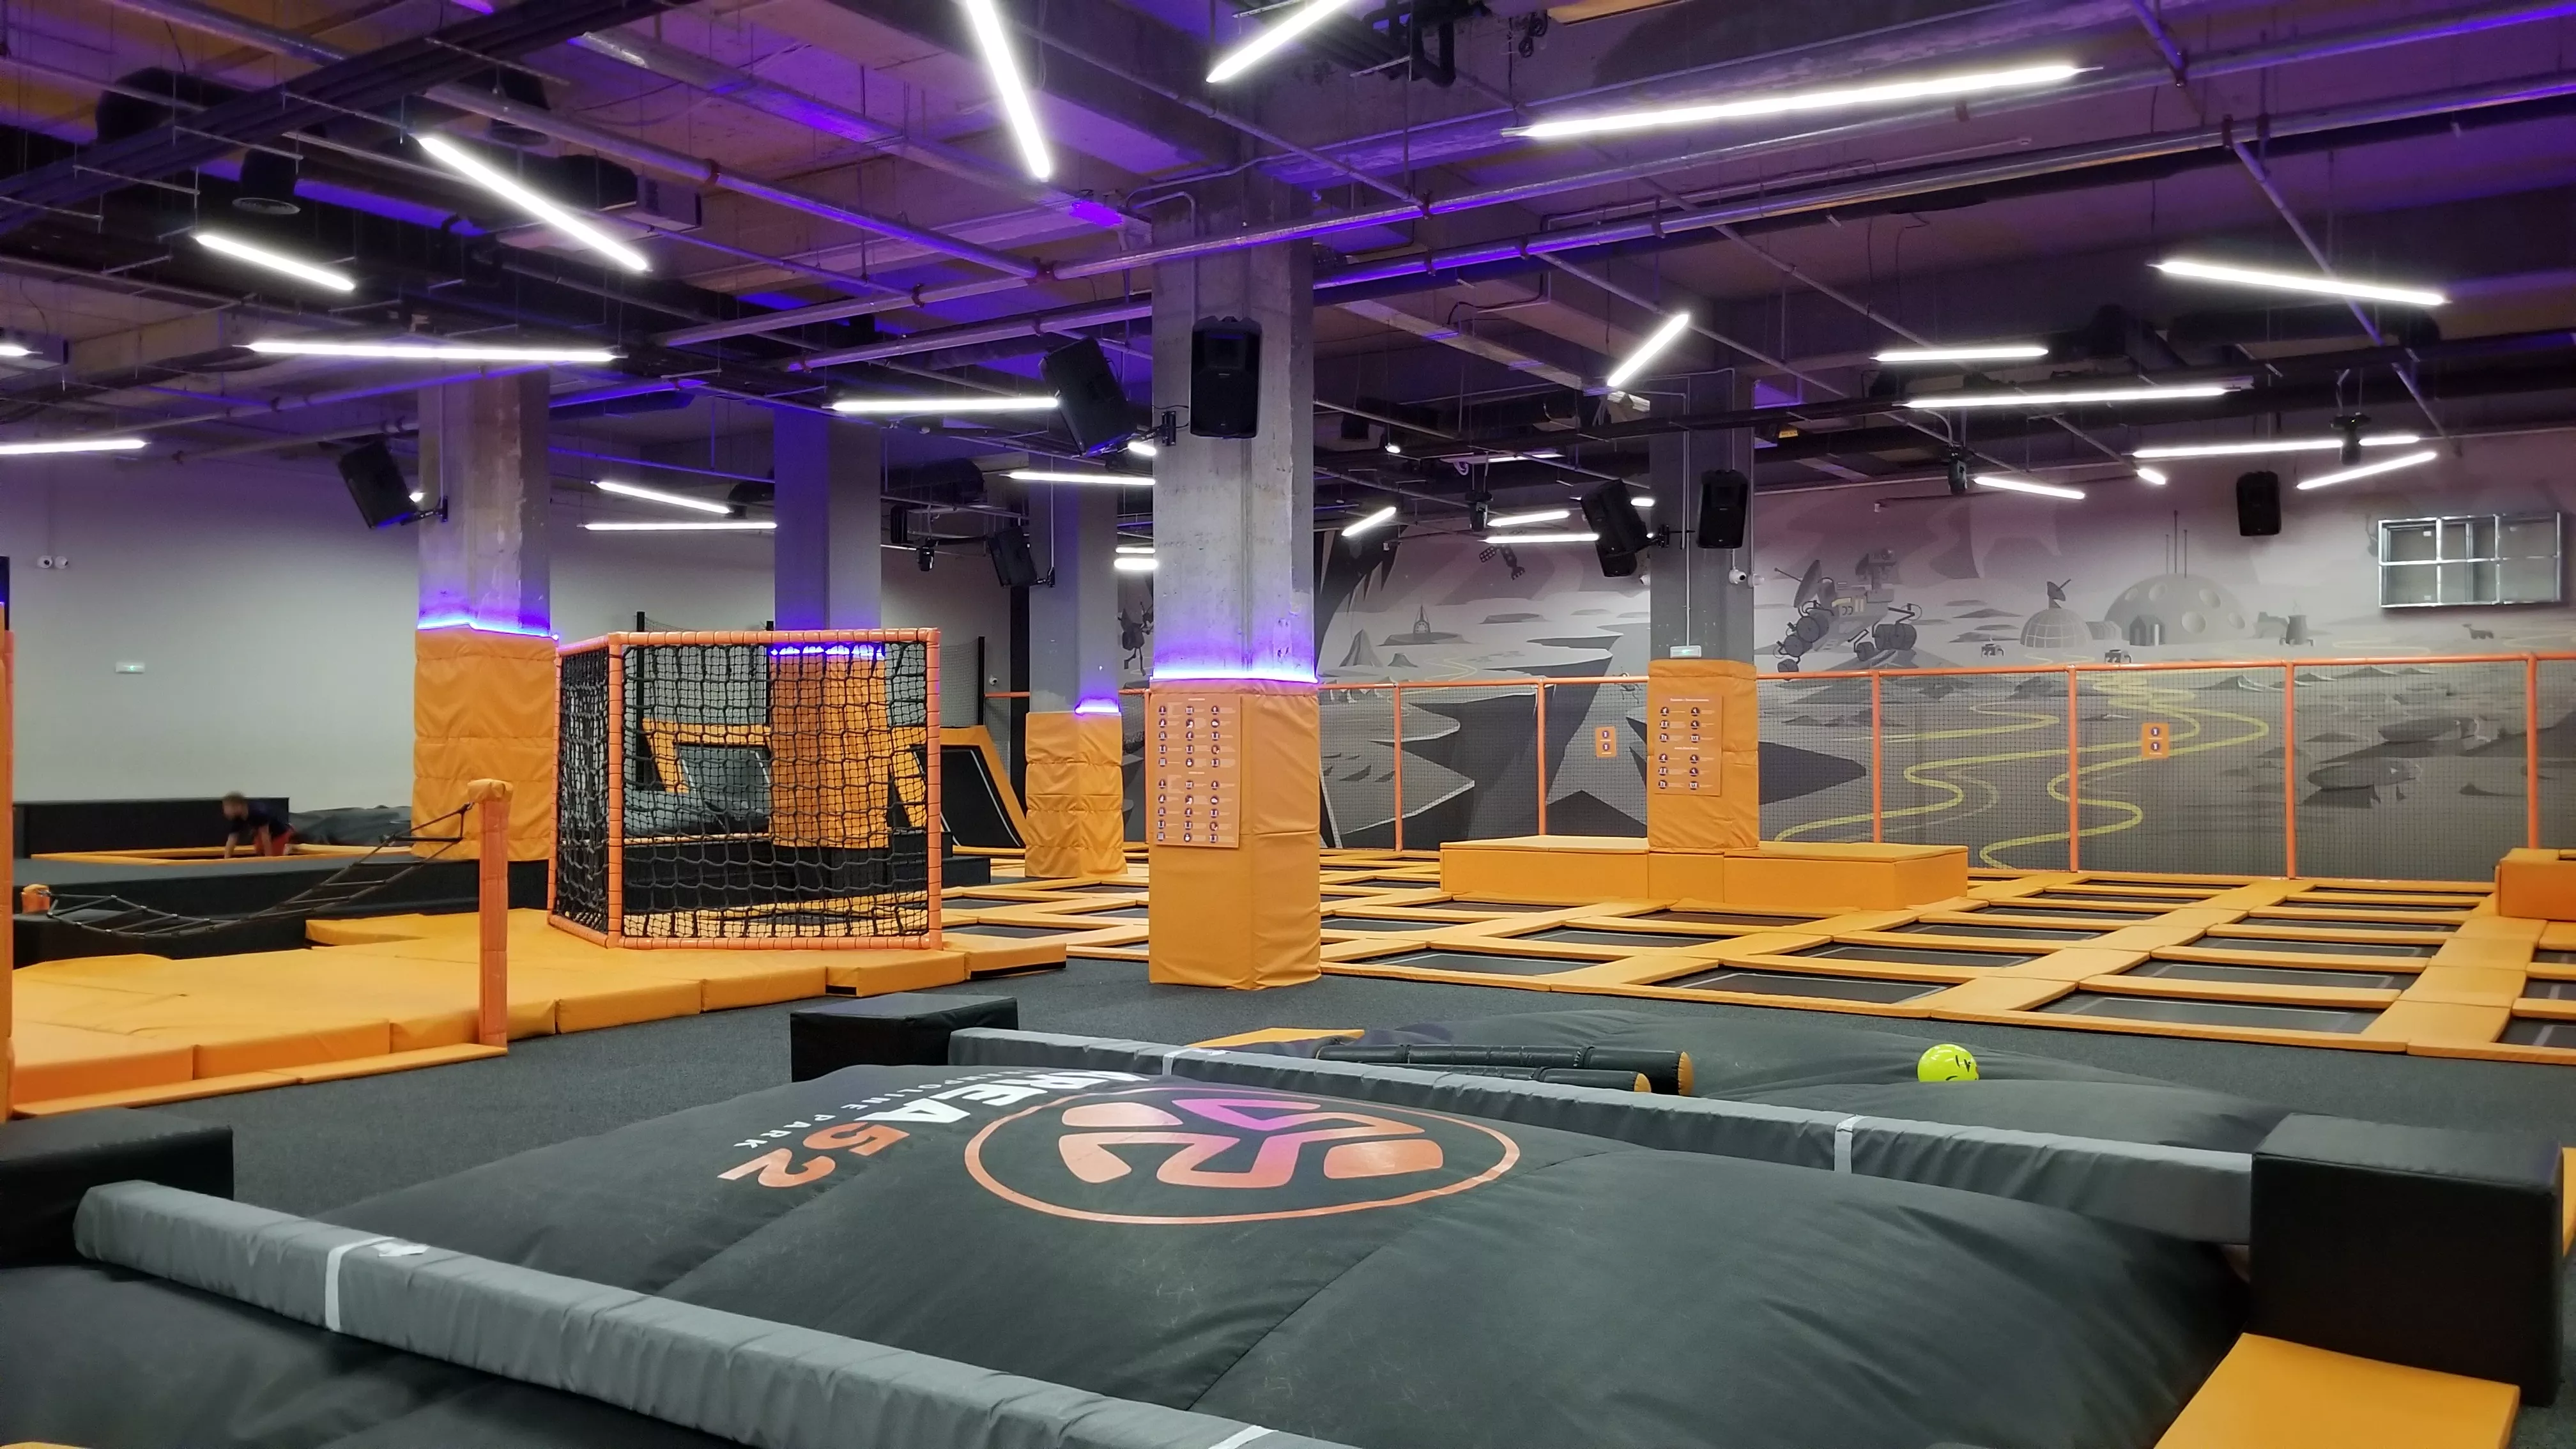 Area 52 Trampoline Park in Bulgaria, Europe | Trampolining - Rated 3.4